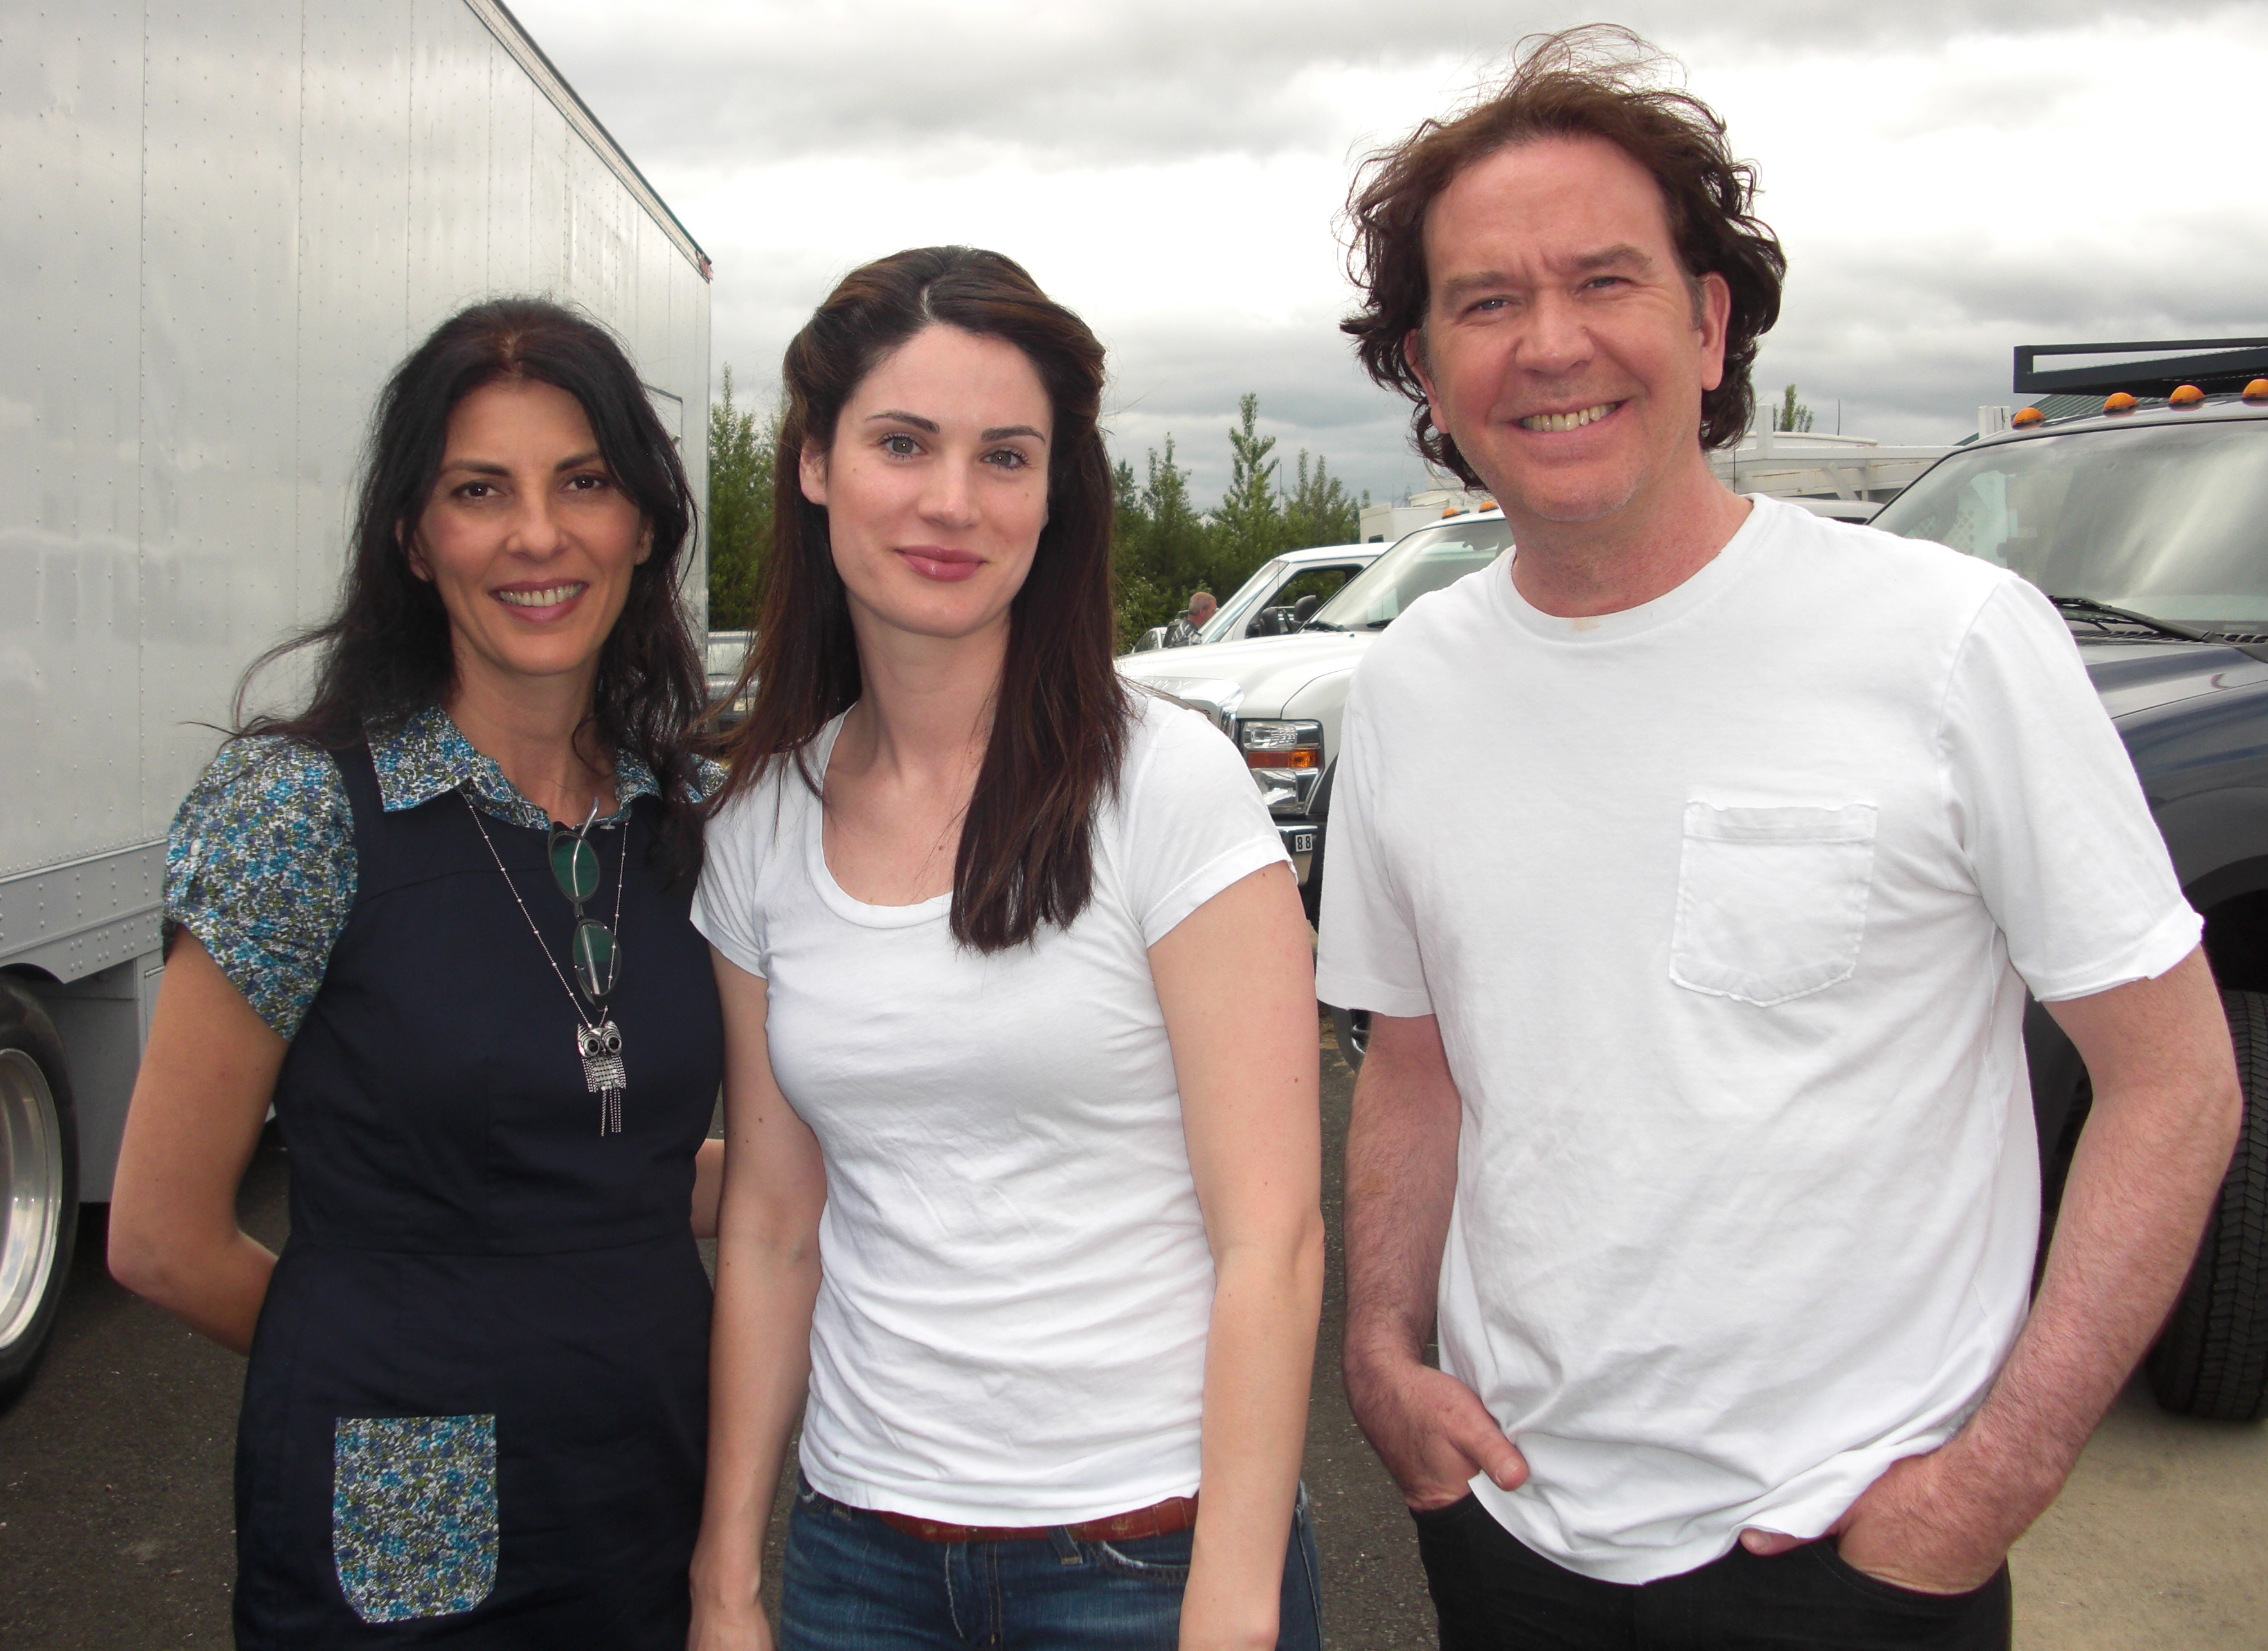 Timothy Hutton, Gina Bellman and Anora Lyn on the set of Leverage.